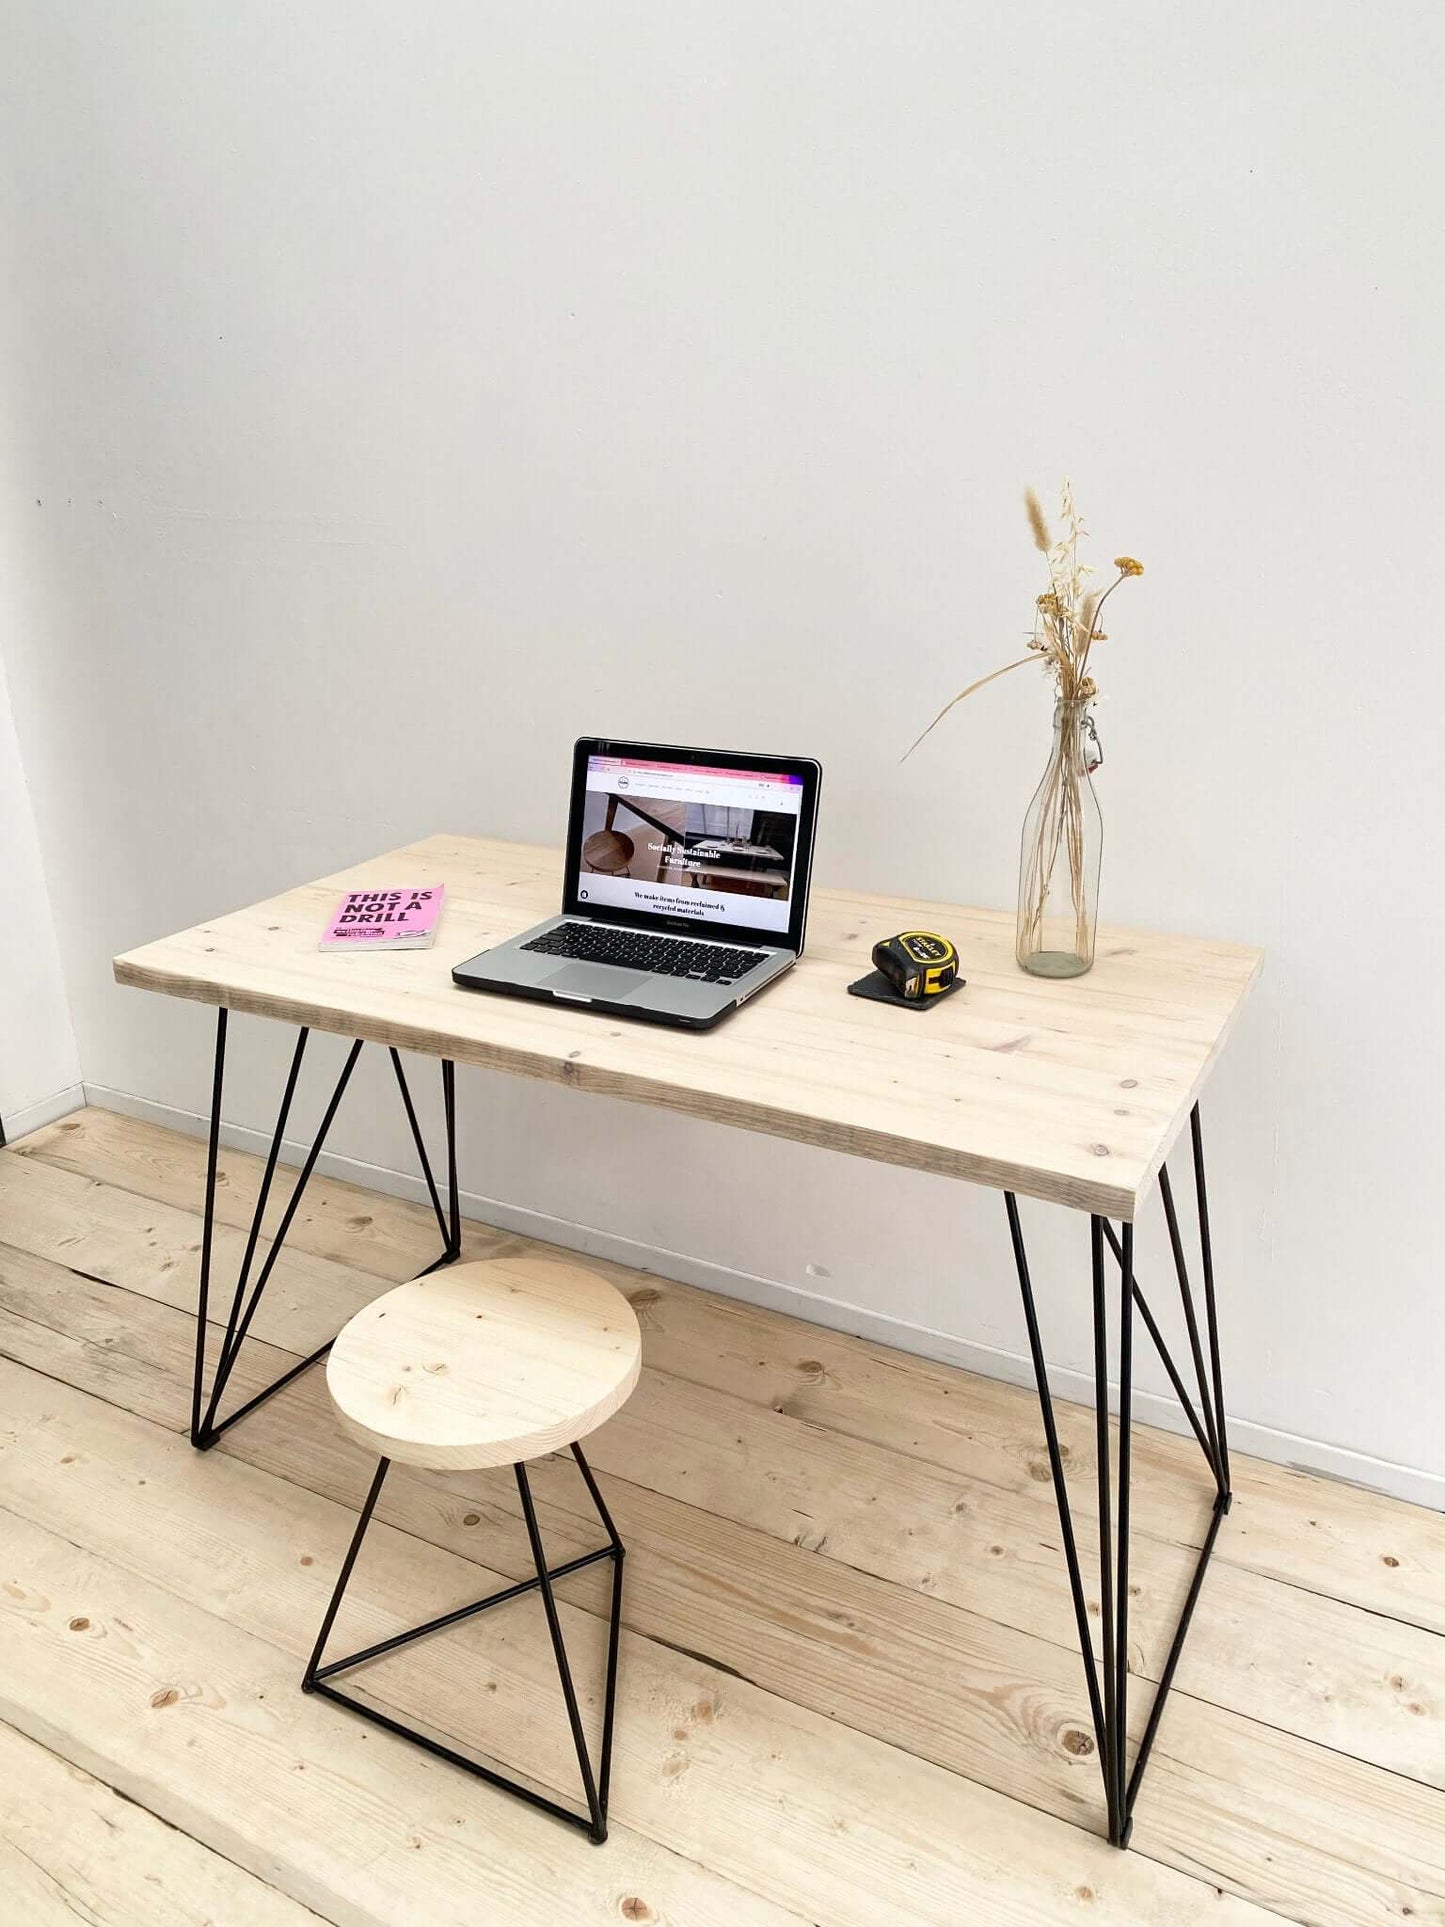 Reclaimed wood desk with industrial legs.